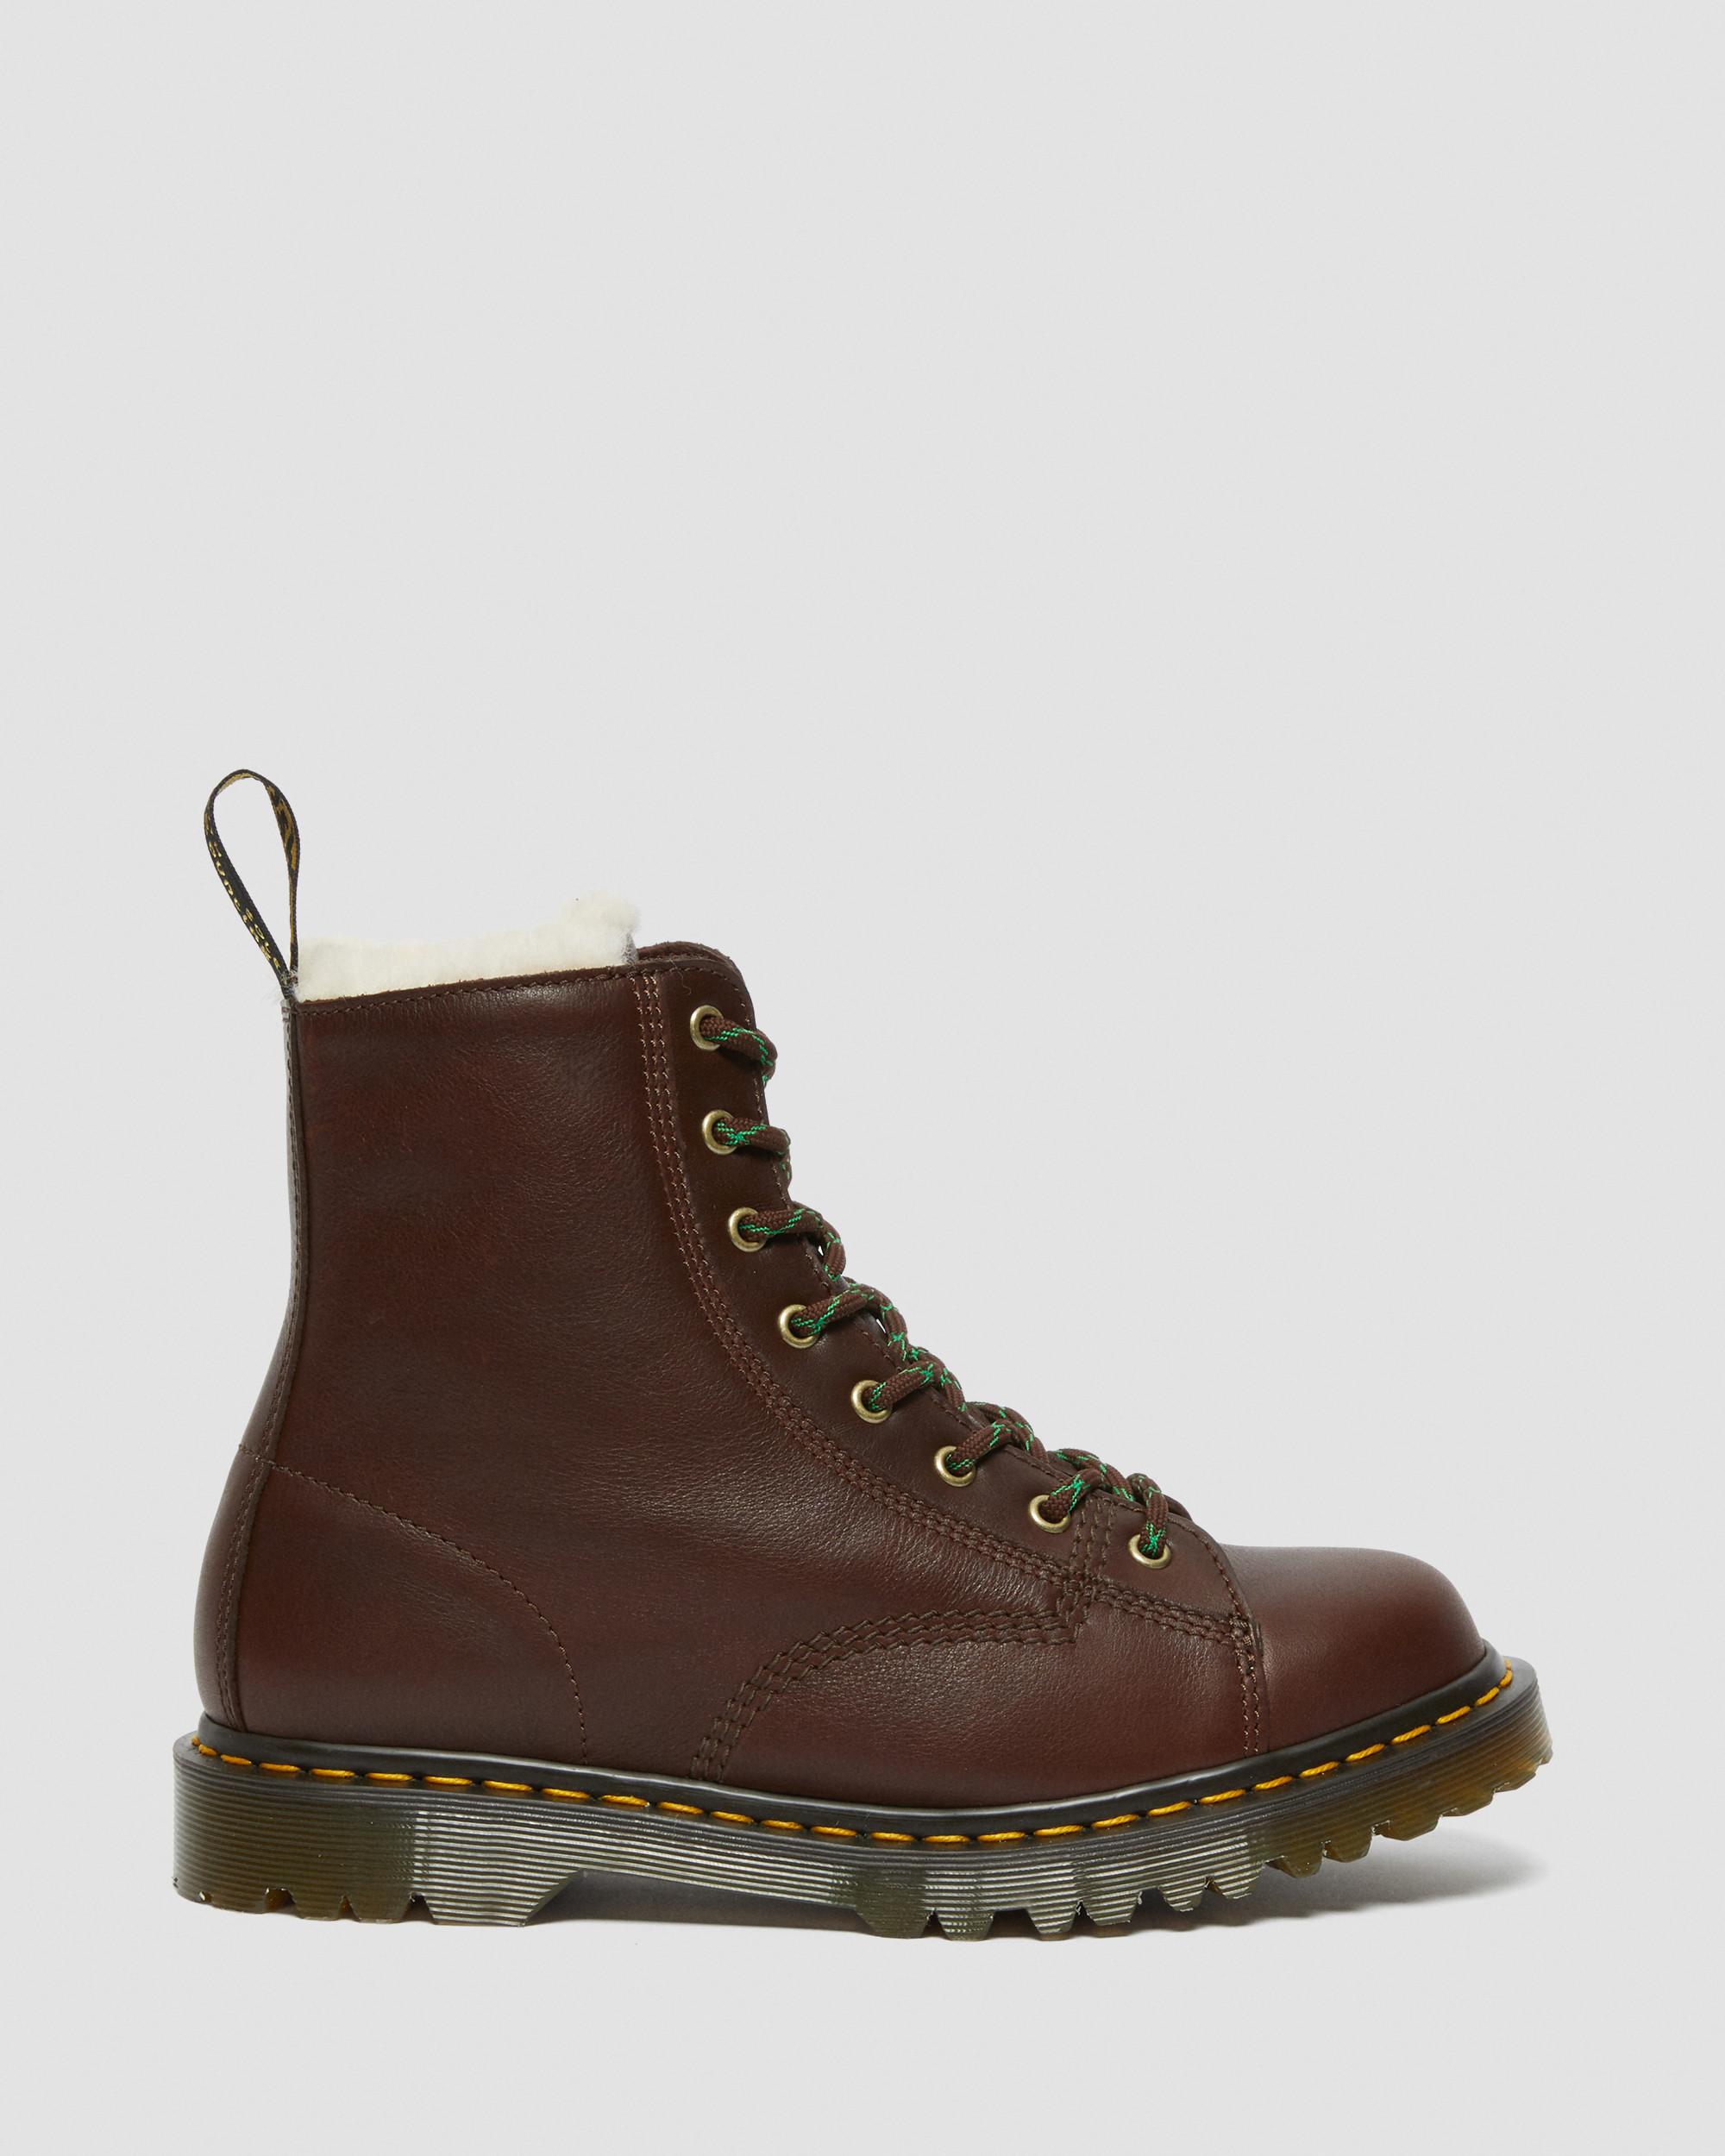 Barton Shearling Lined Brown Leather Ankle BootsStivaletti Di Pelle Barton Foderati In Shearling Dr. Martens